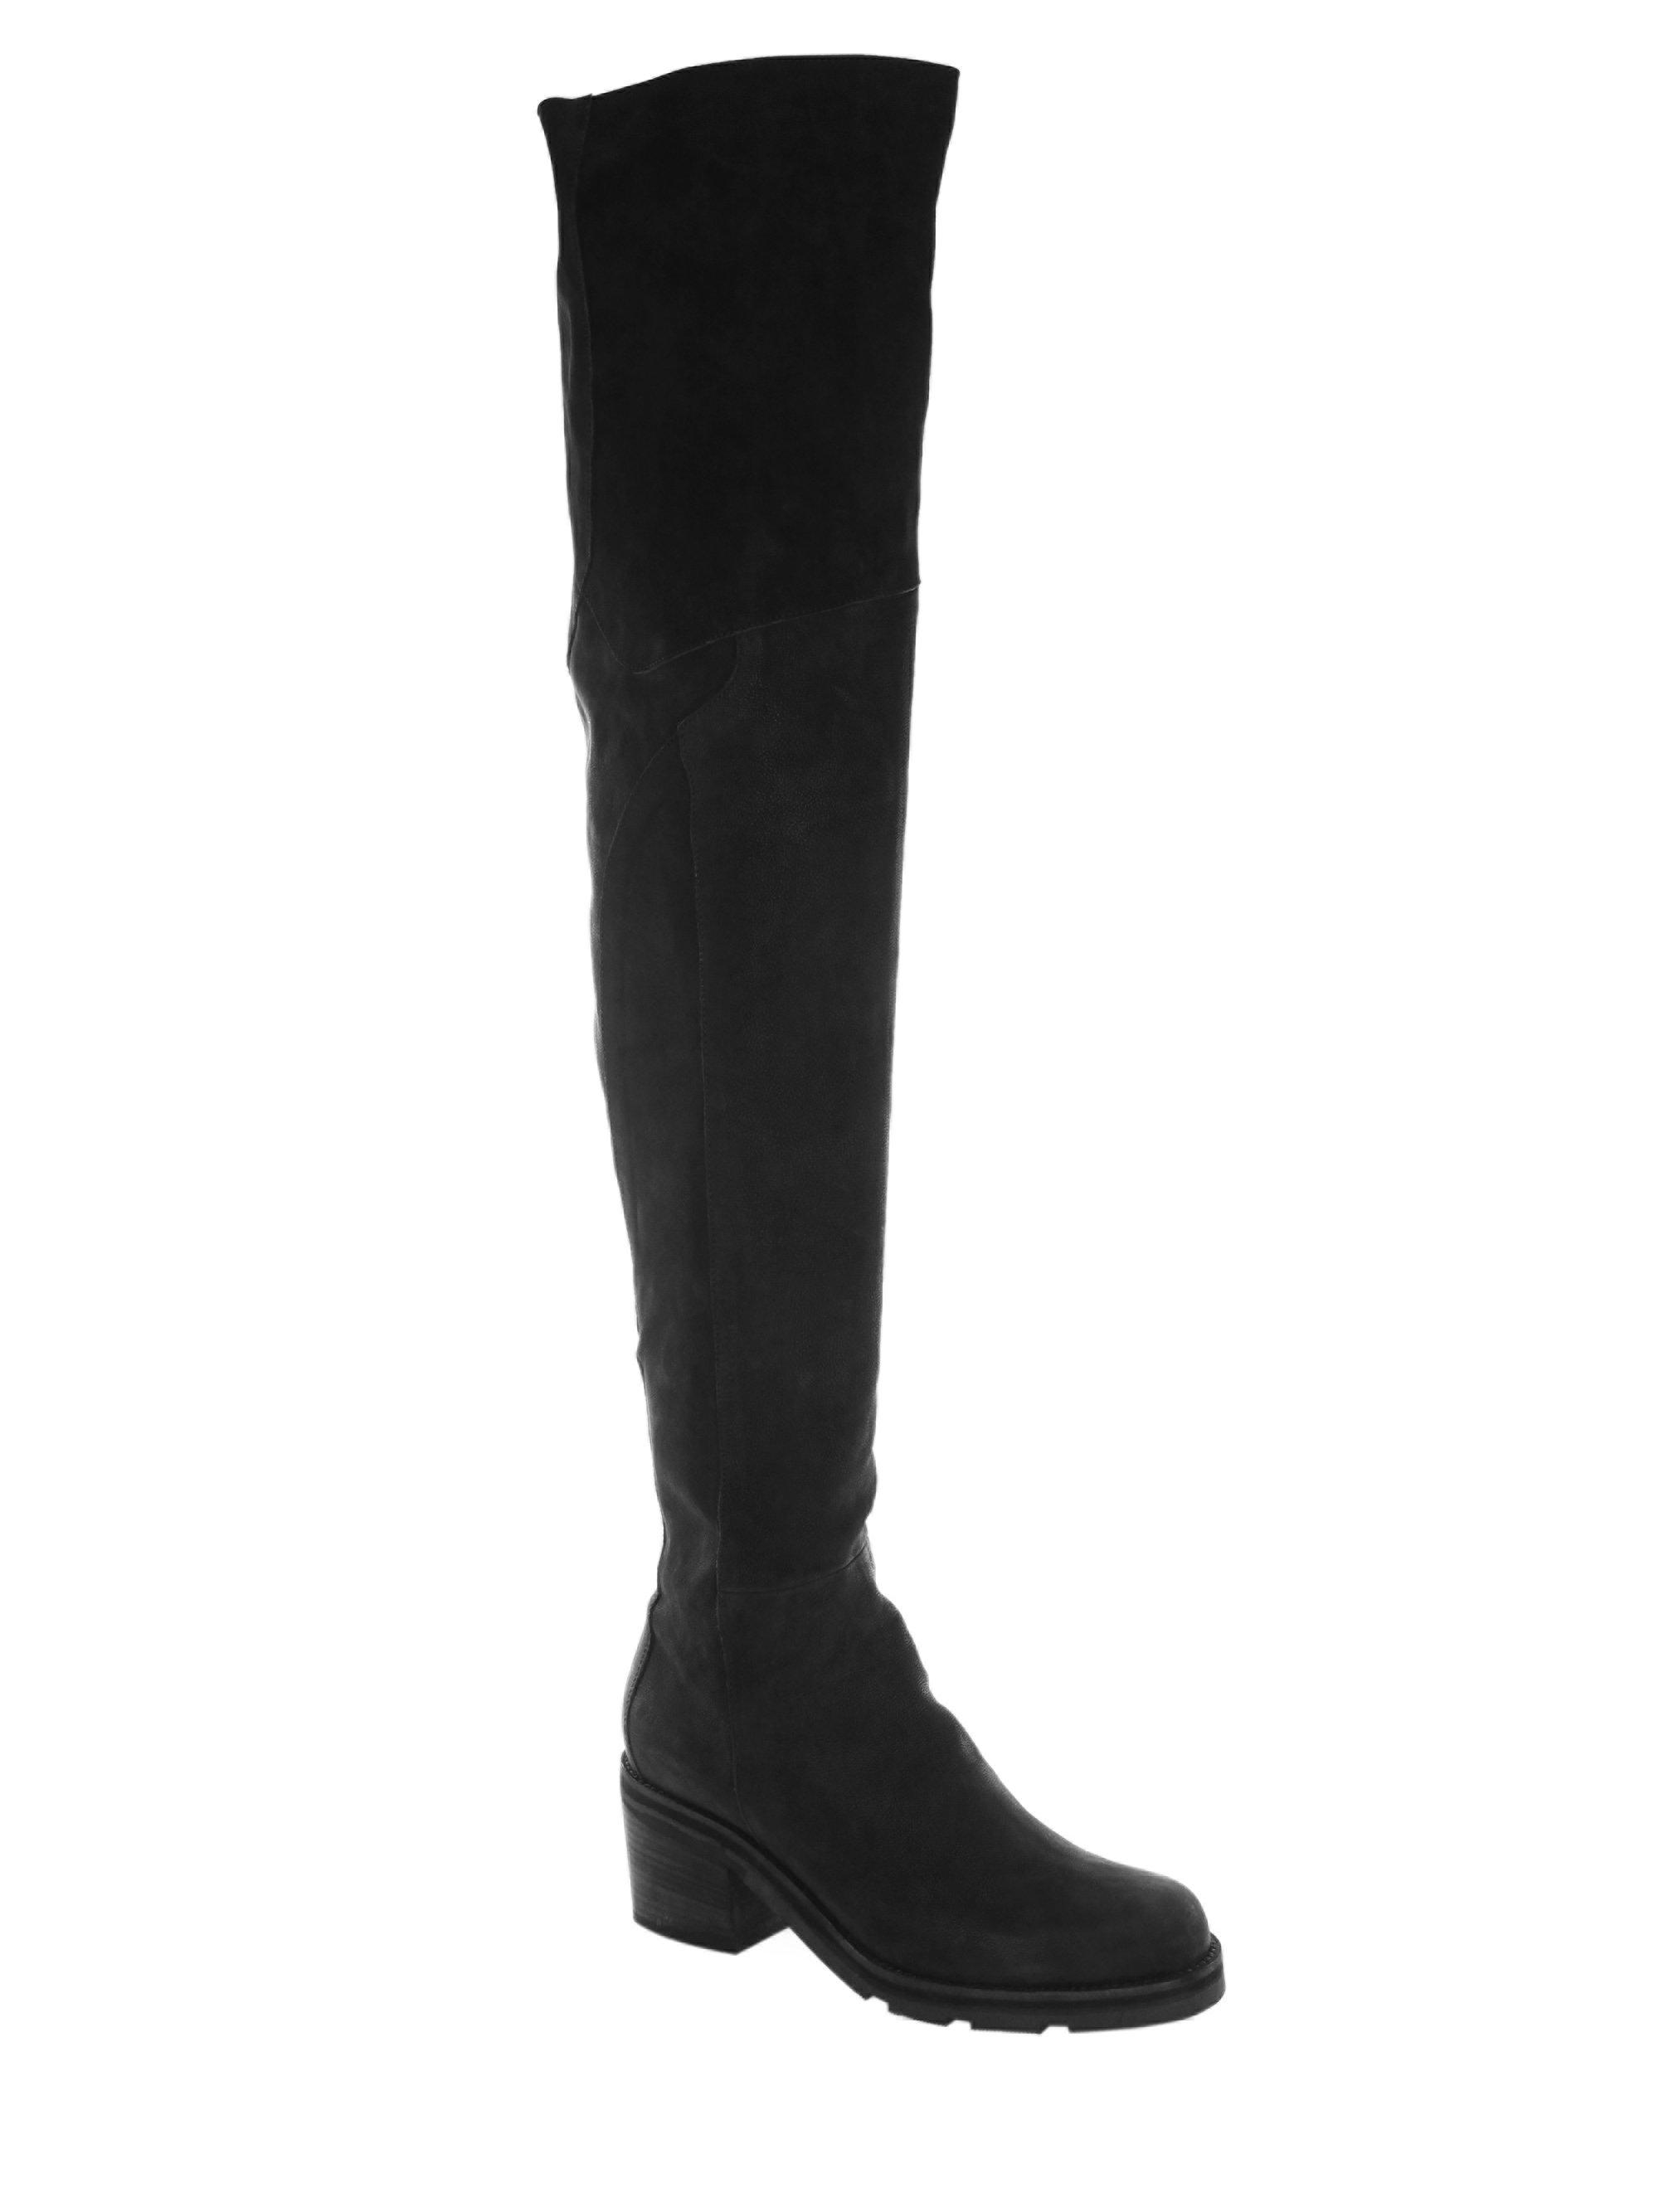 Lyst - Ld Tuttle The Stack Leather Over-the-knee Boots in Black